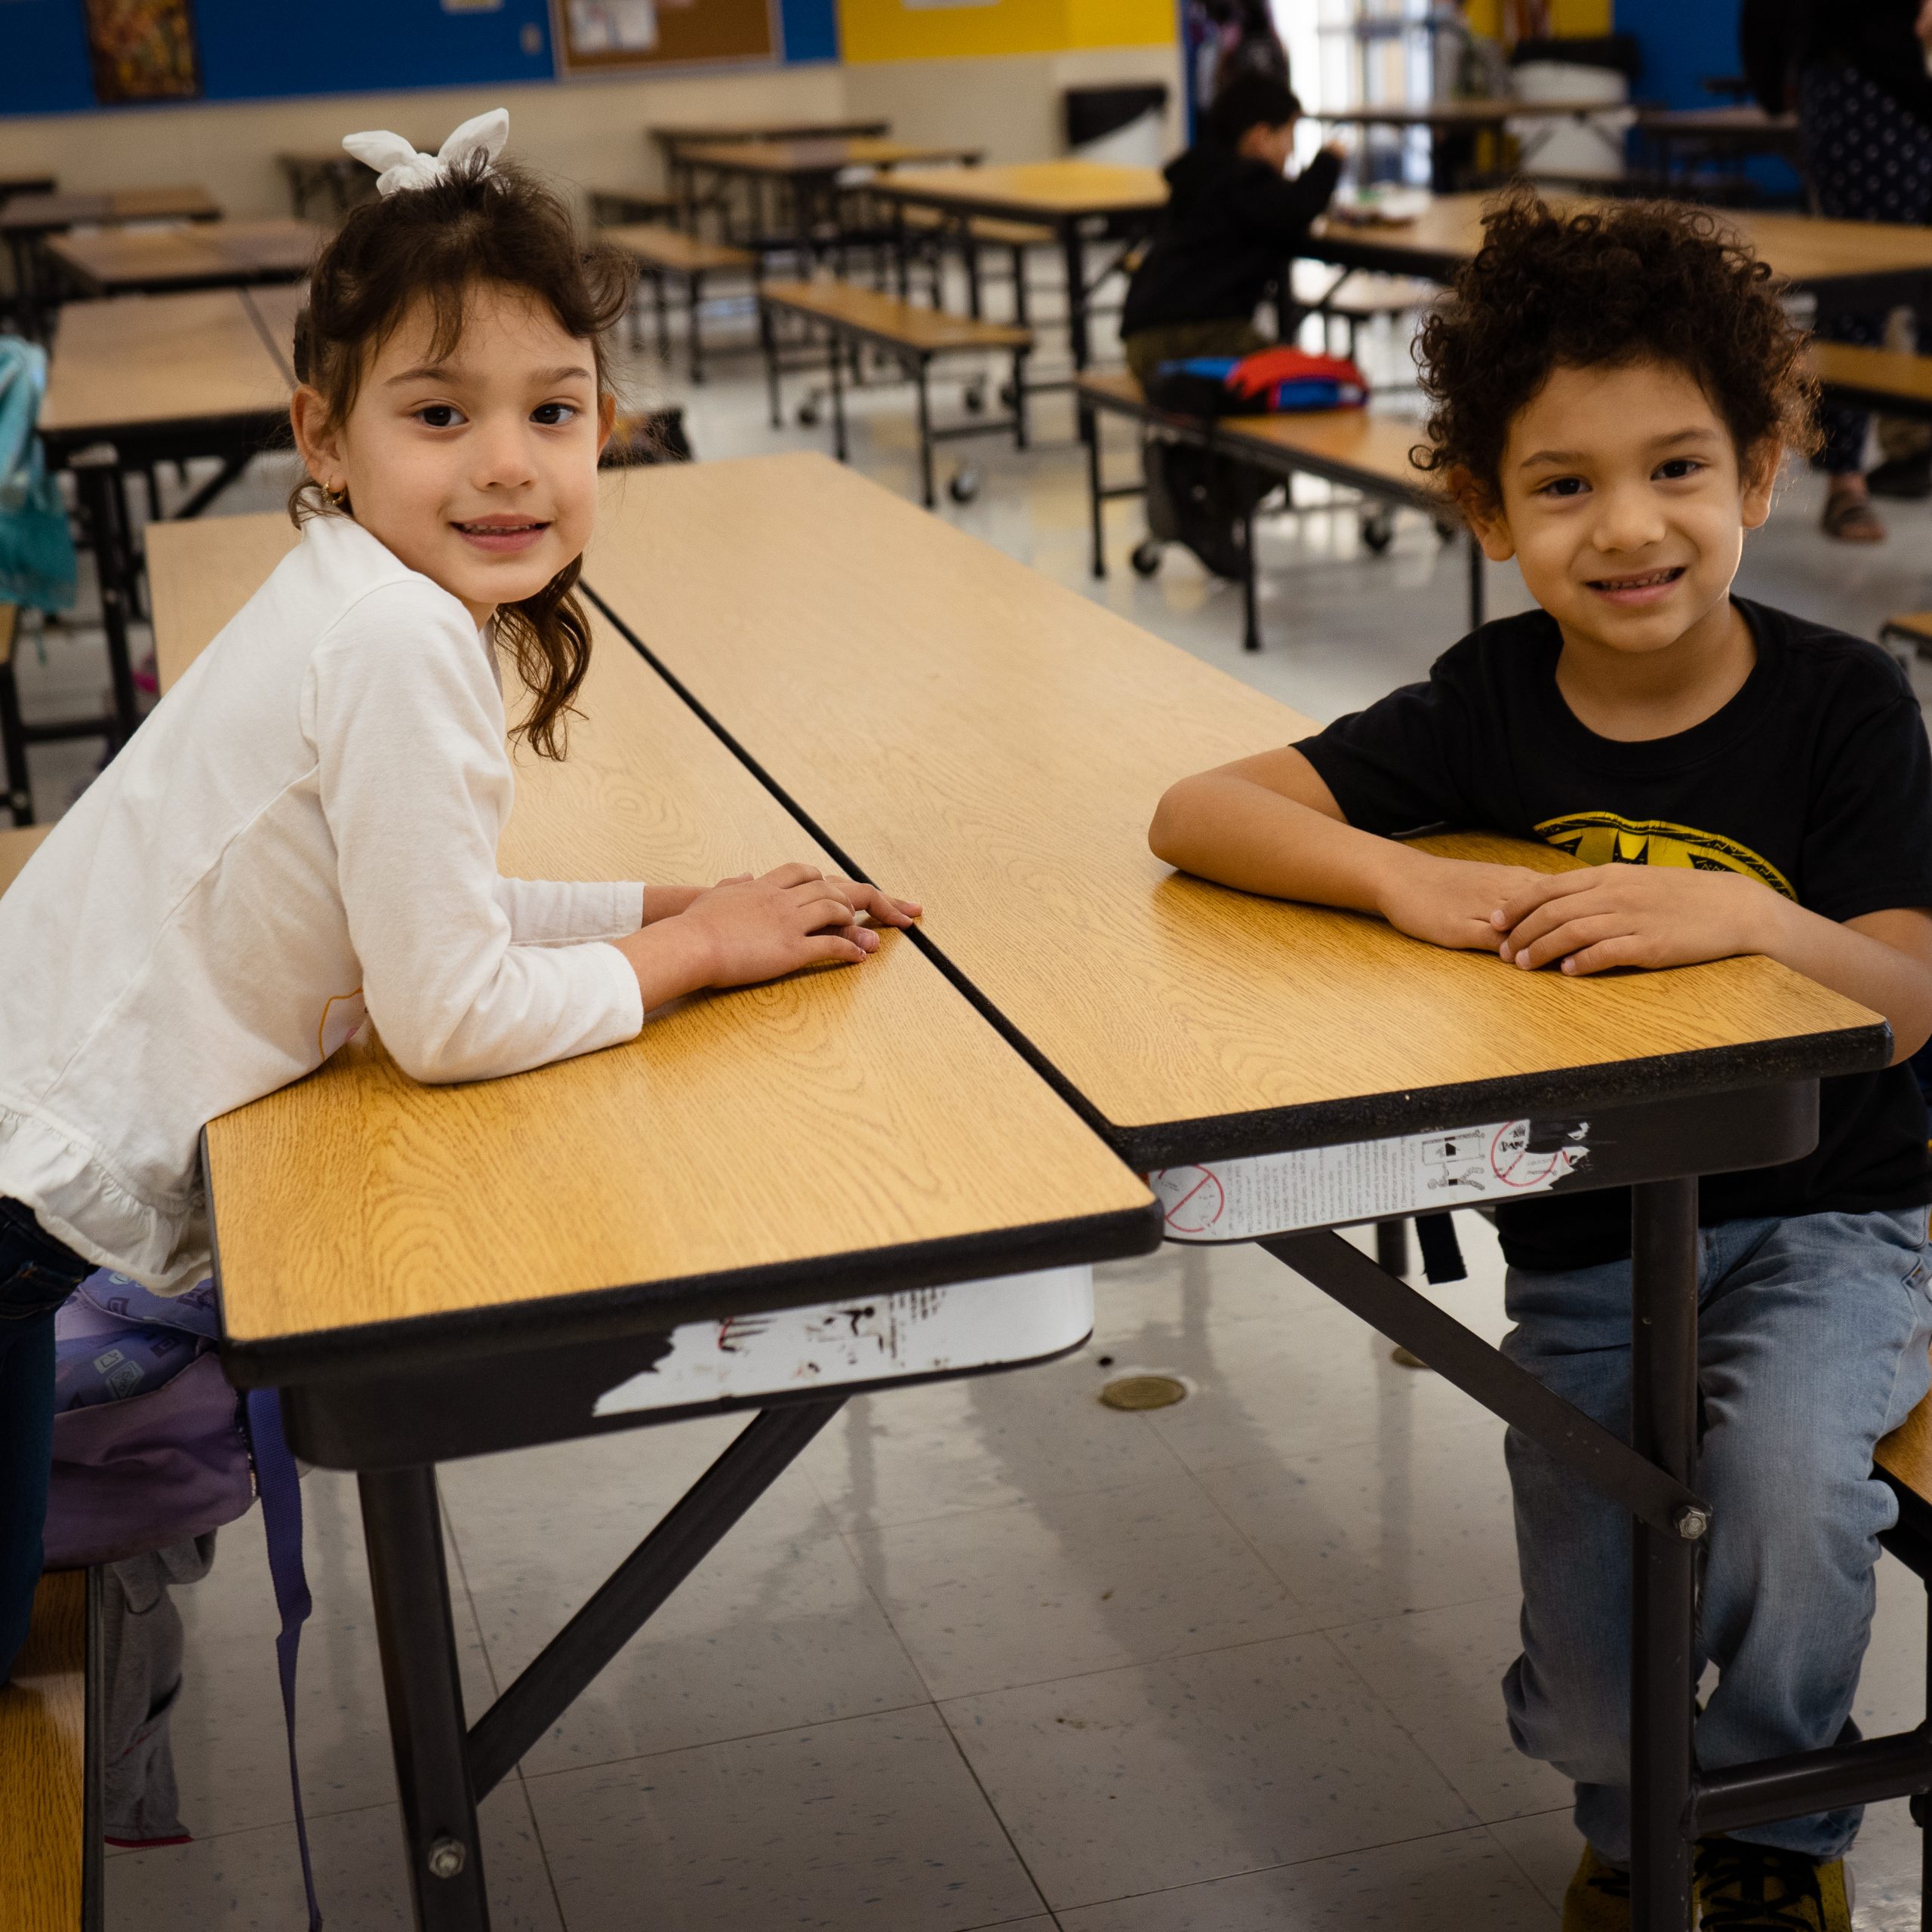 Two students are sitting at a table and smiling for a photo